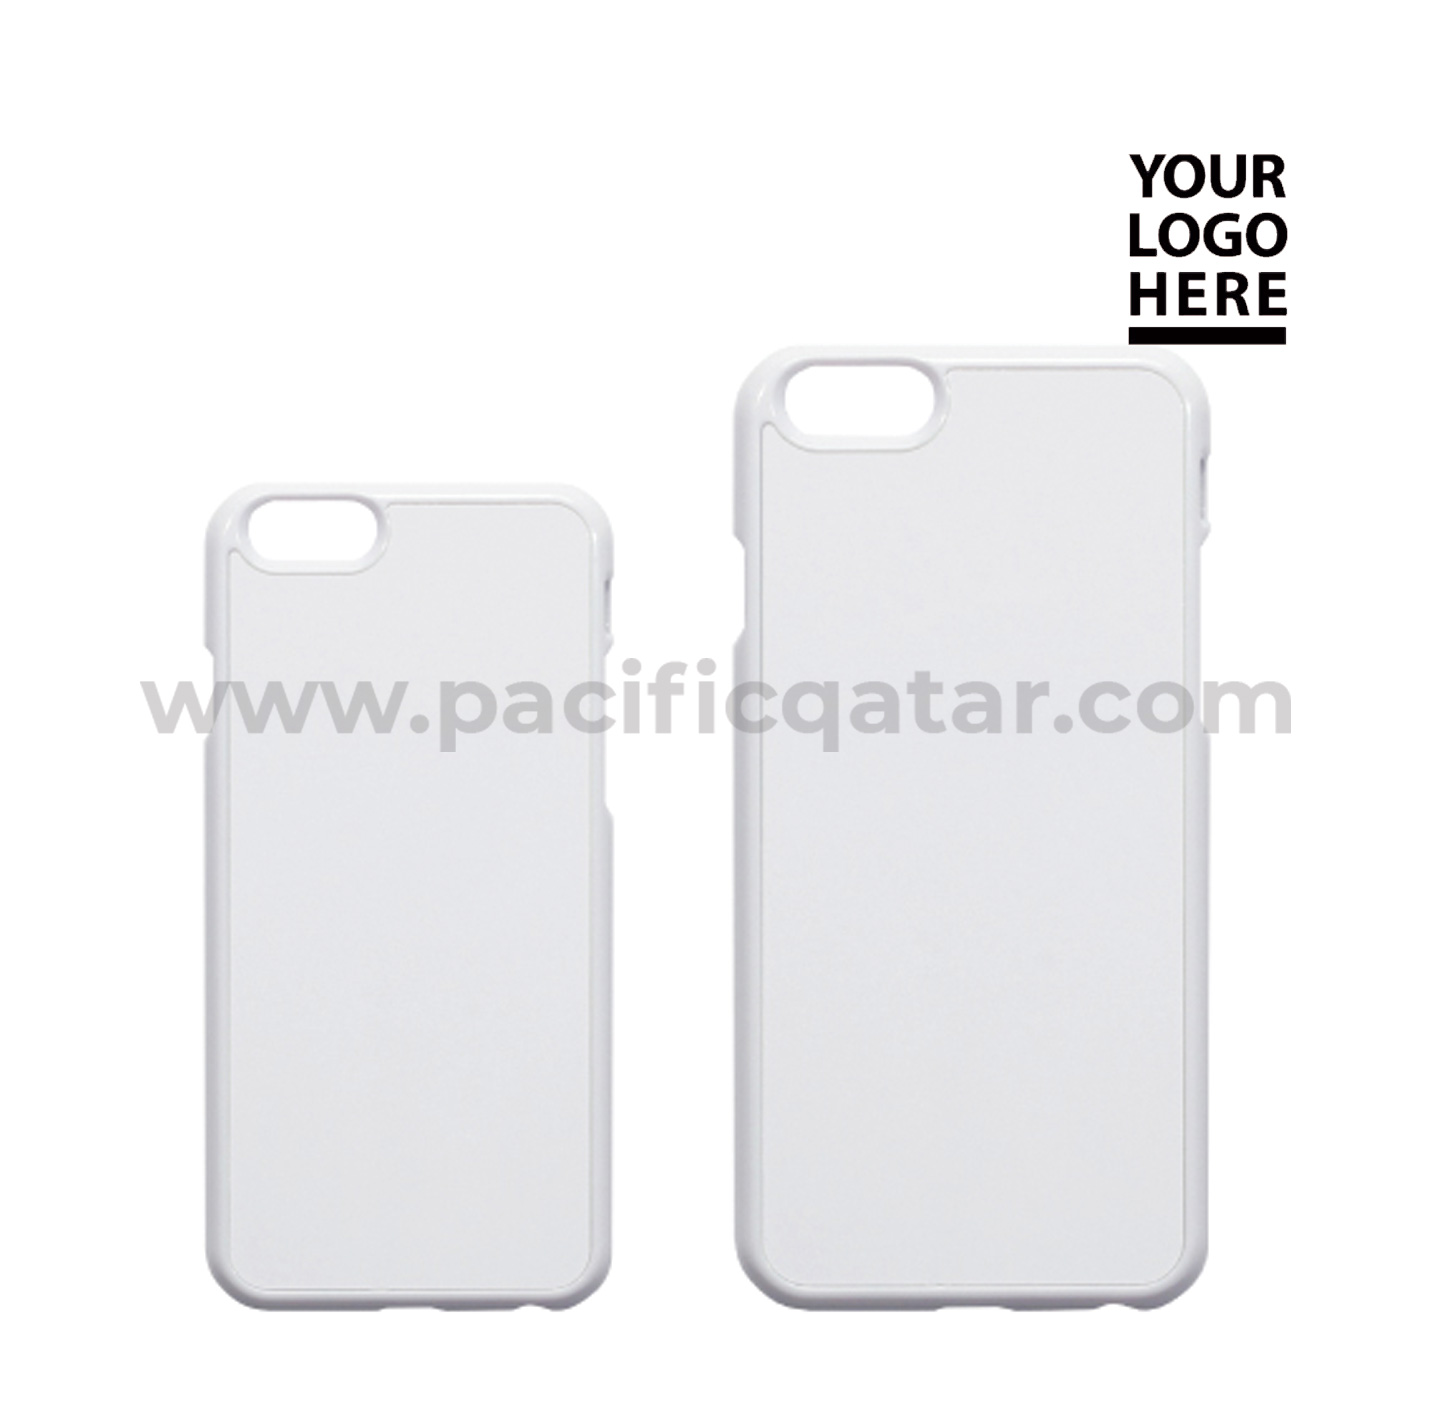 Iphone 6 and 6 plus 2d phone covers